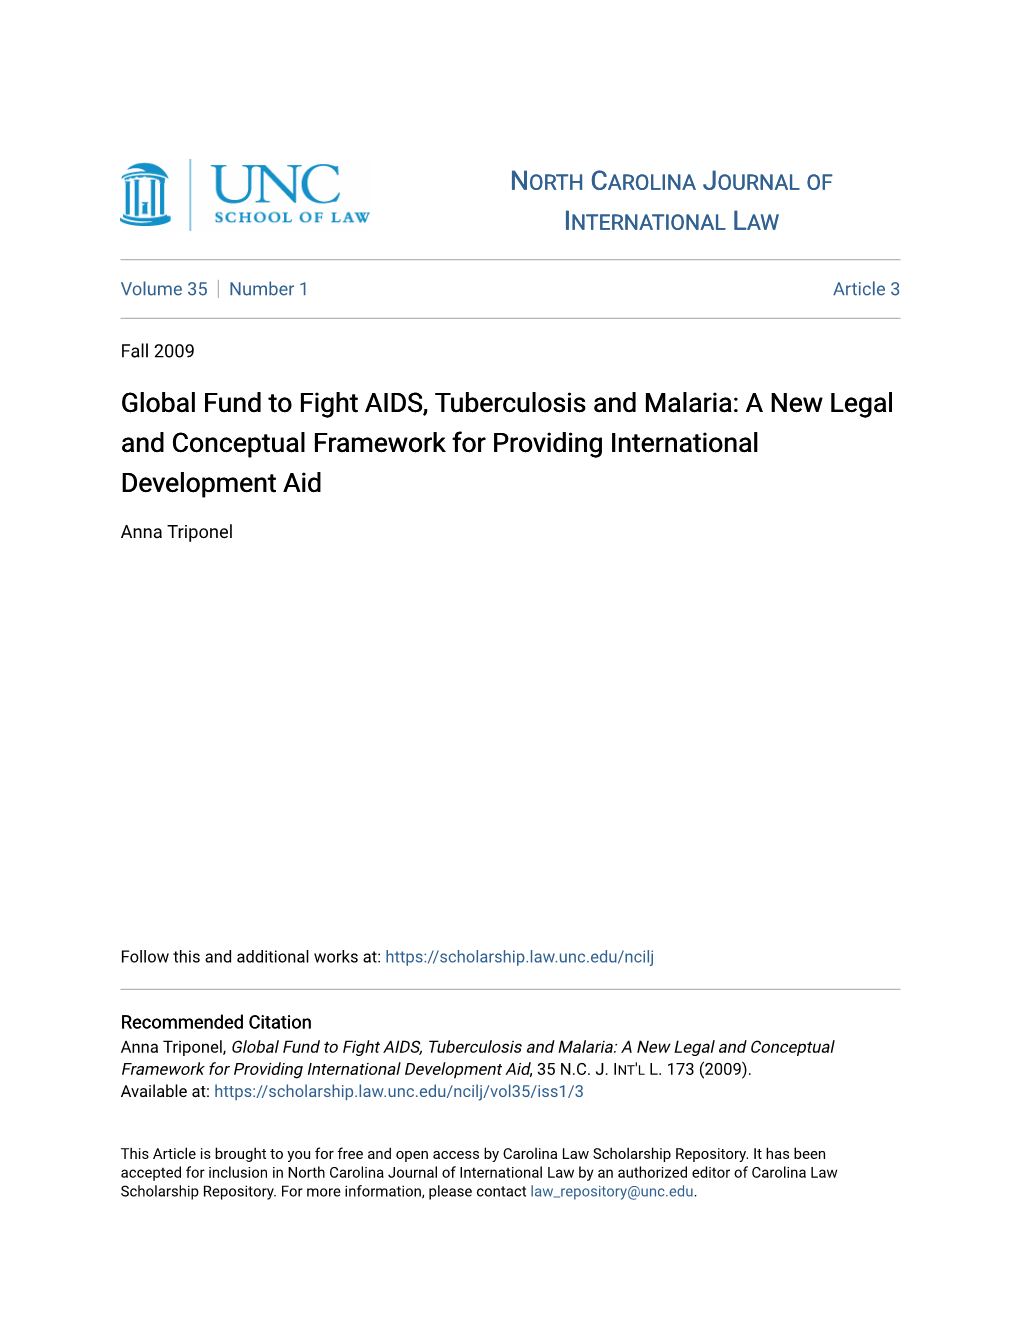 Global Fund to Fight AIDS, Tuberculosis and Malaria: a New Legal and Conceptual Framework for Providing International Development Aid